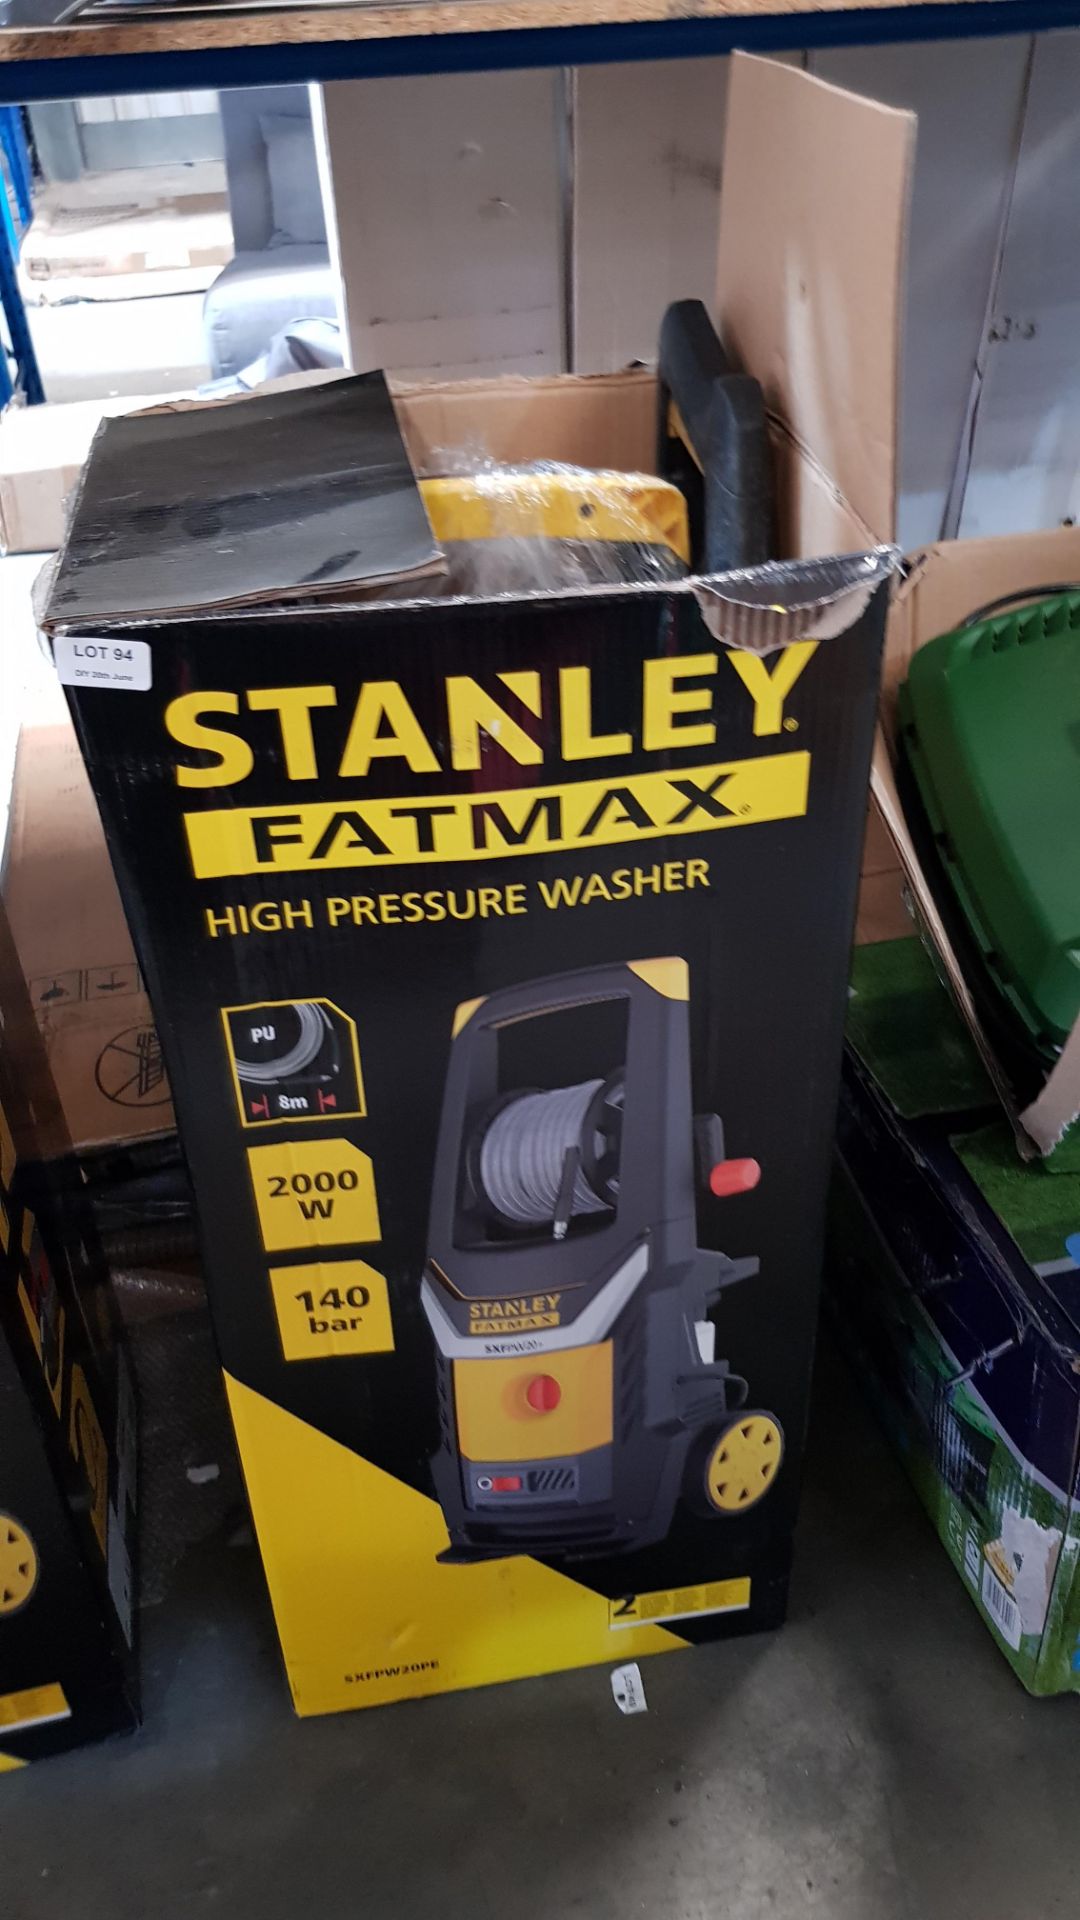 (R5D) 1x Stanley Fatmax 2000W High Pressure Washer. - Image 2 of 2